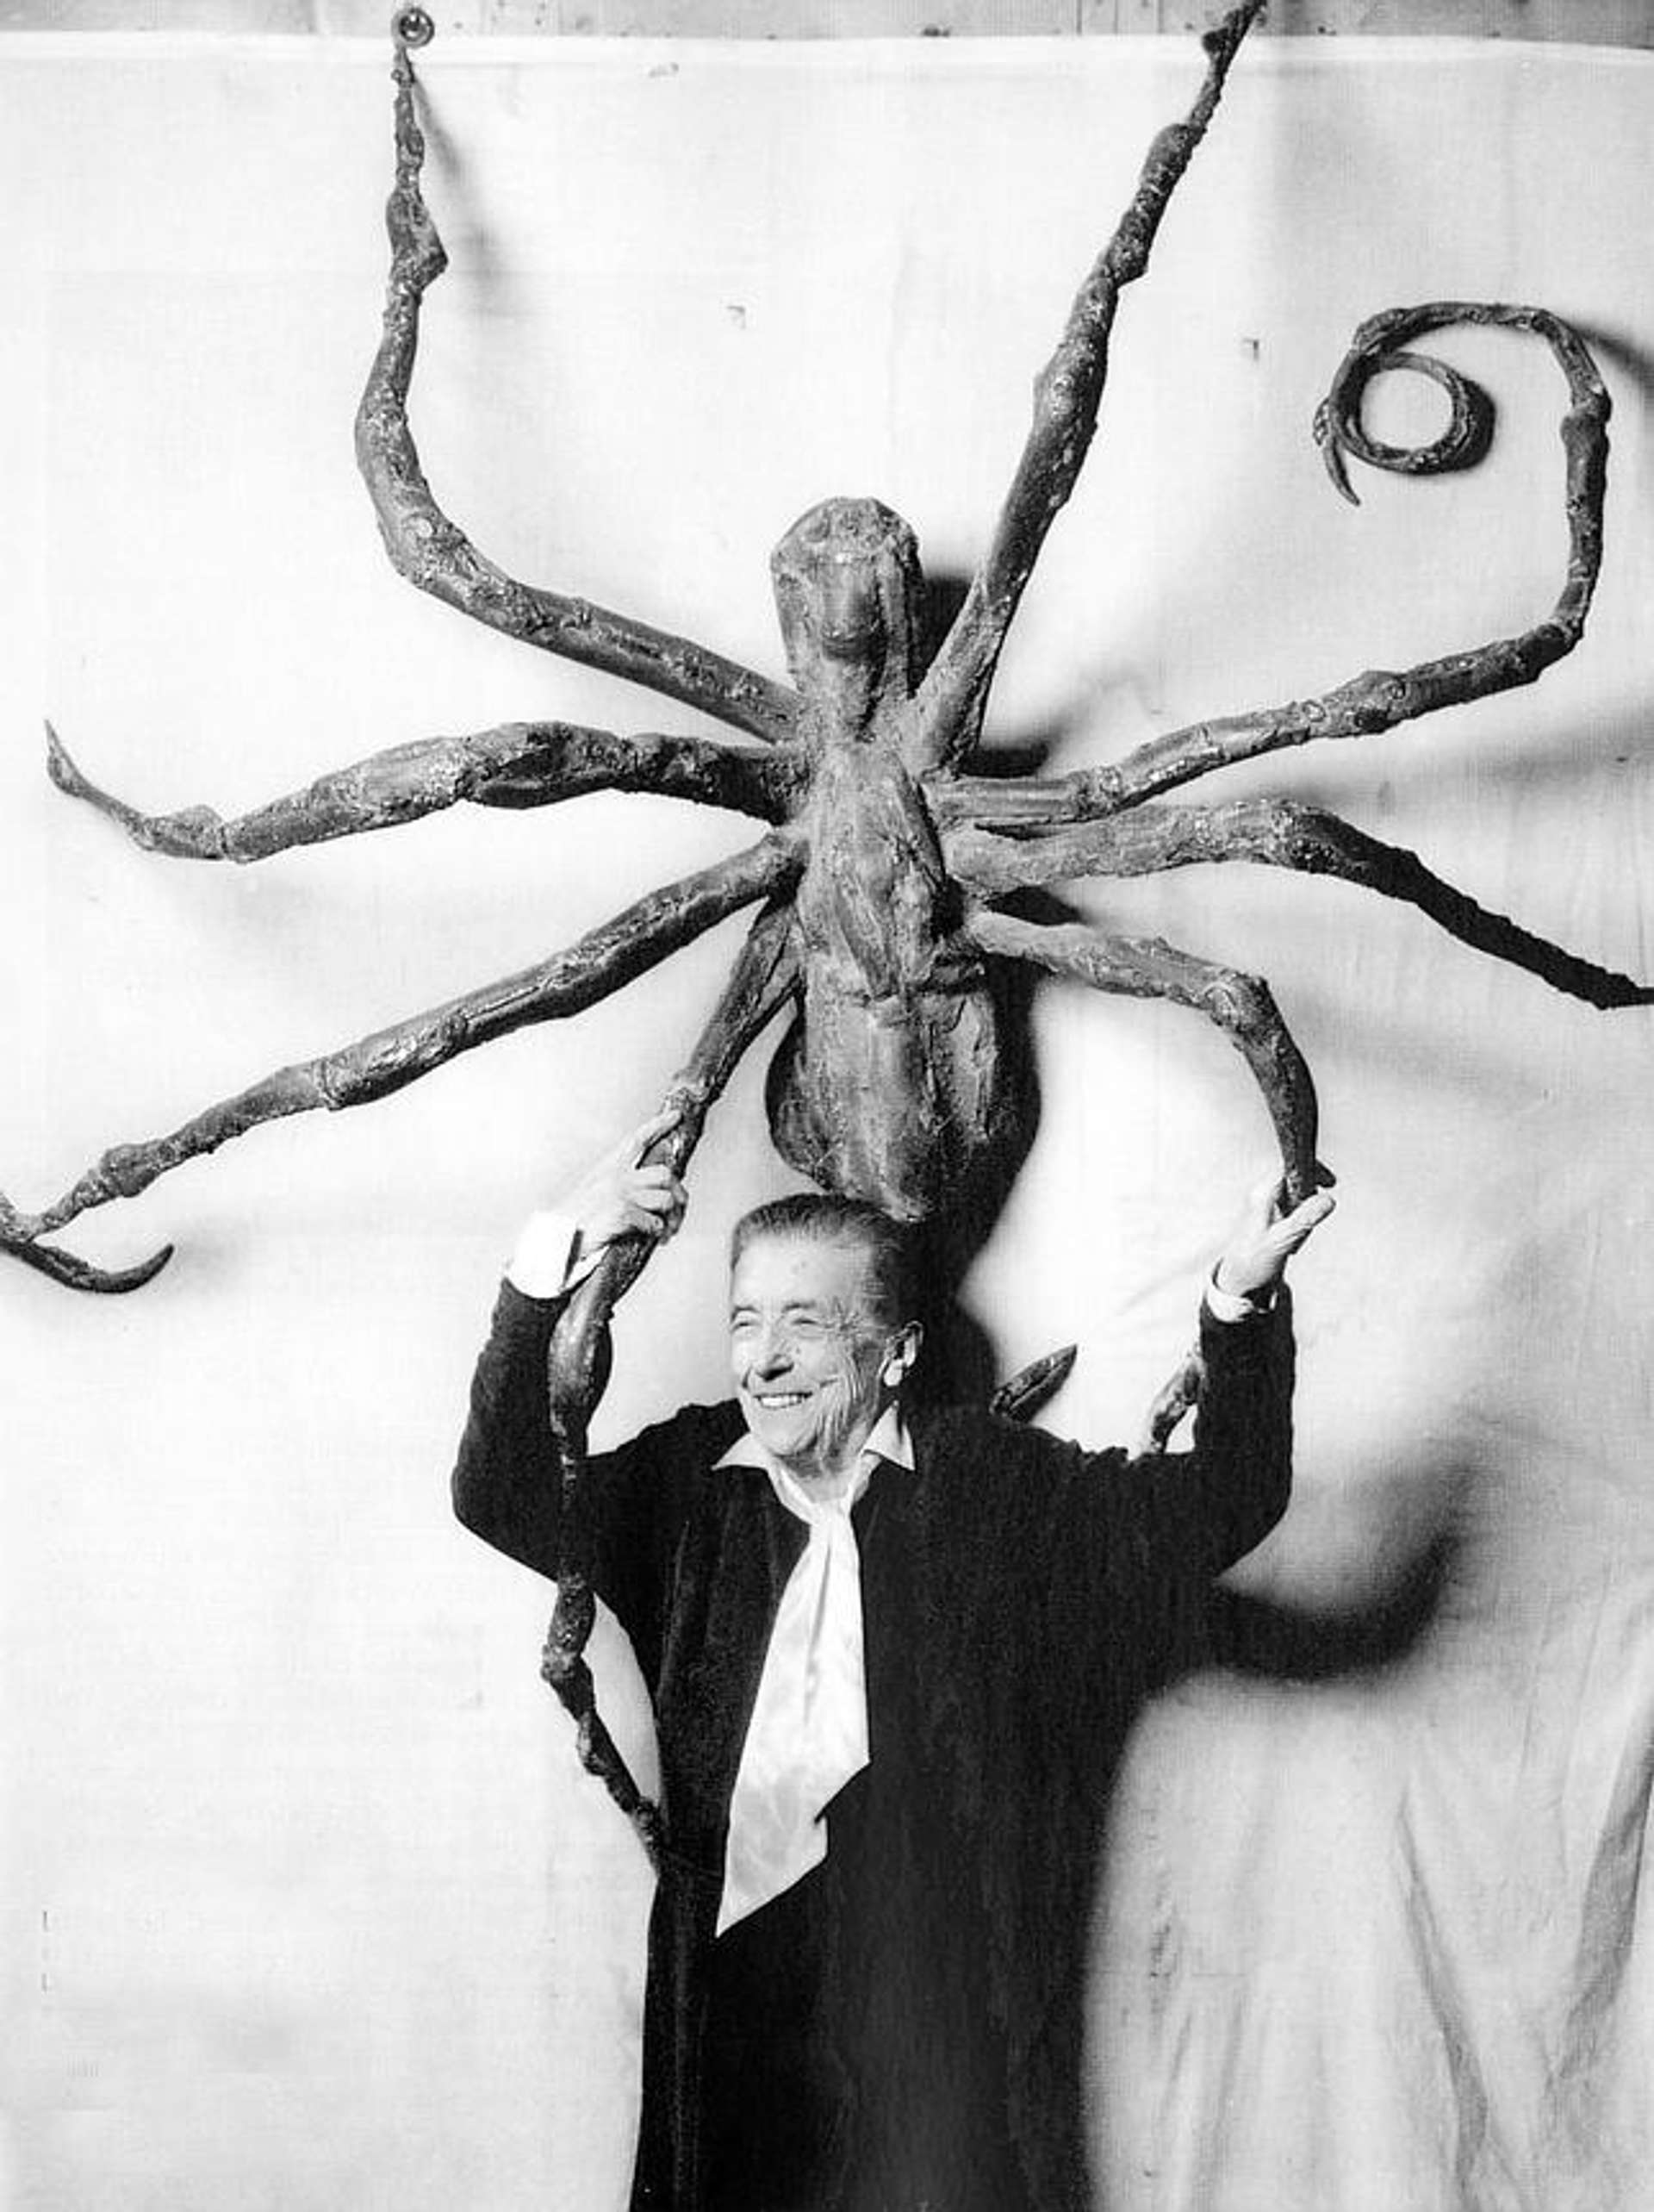 Louise Bourgeois: The Woman Behind The Spider Sculptures